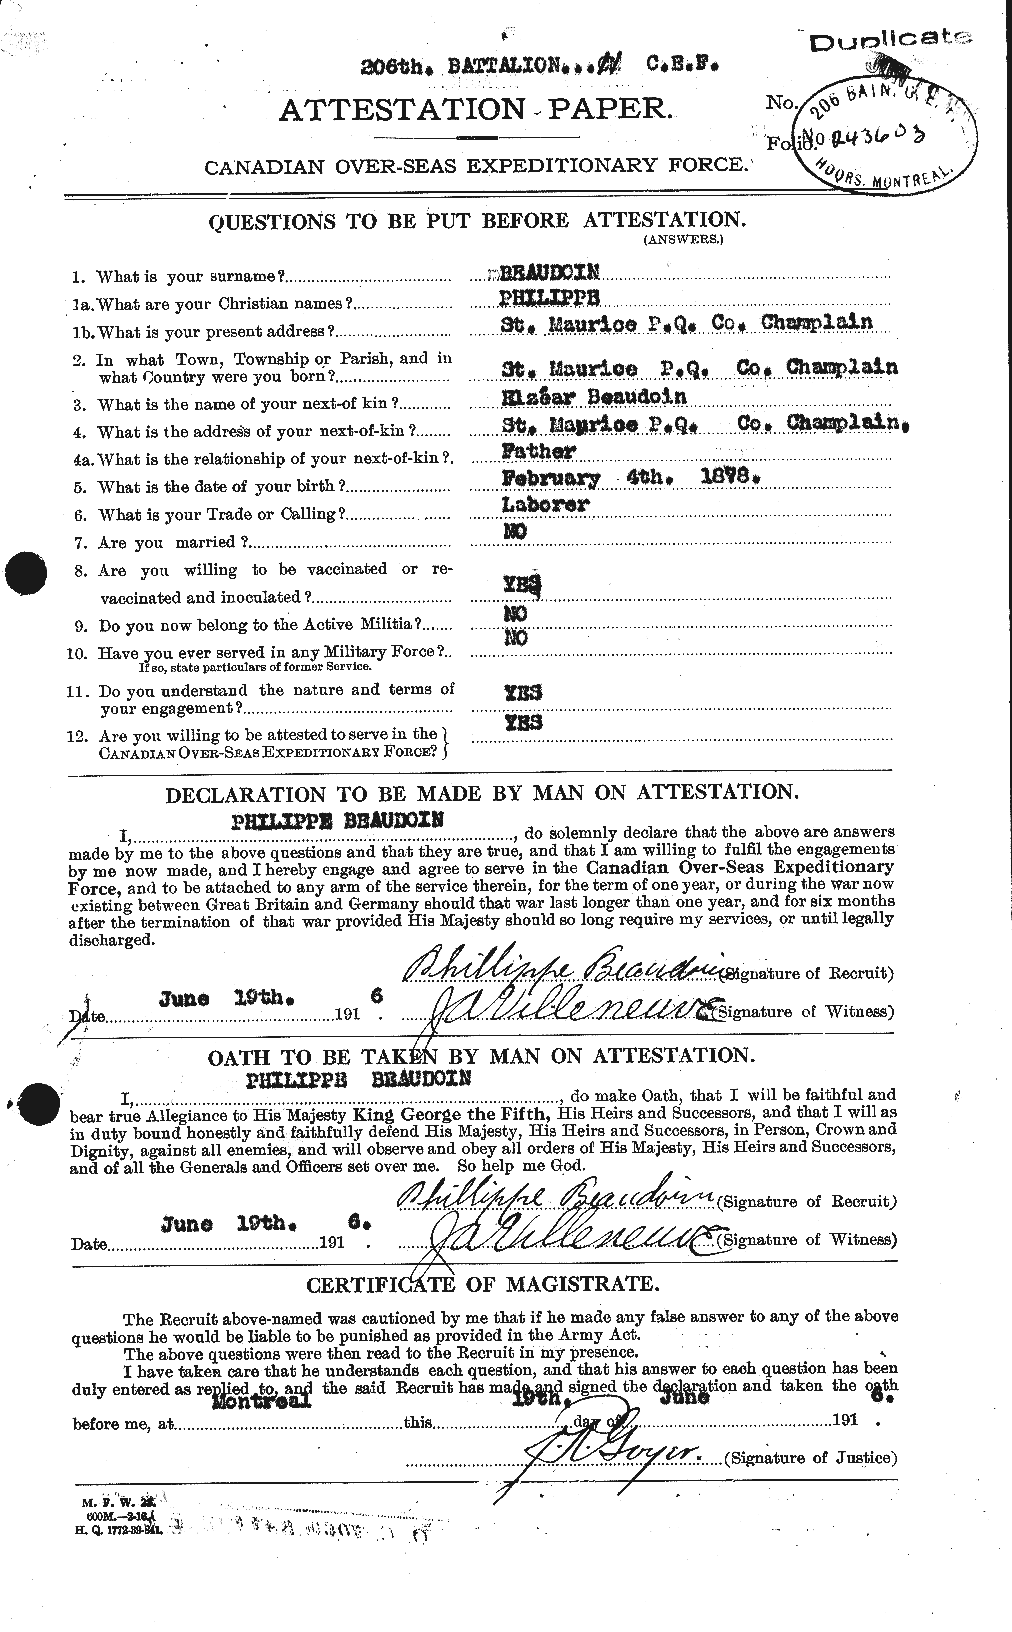 Personnel Records of the First World War - CEF 231288a